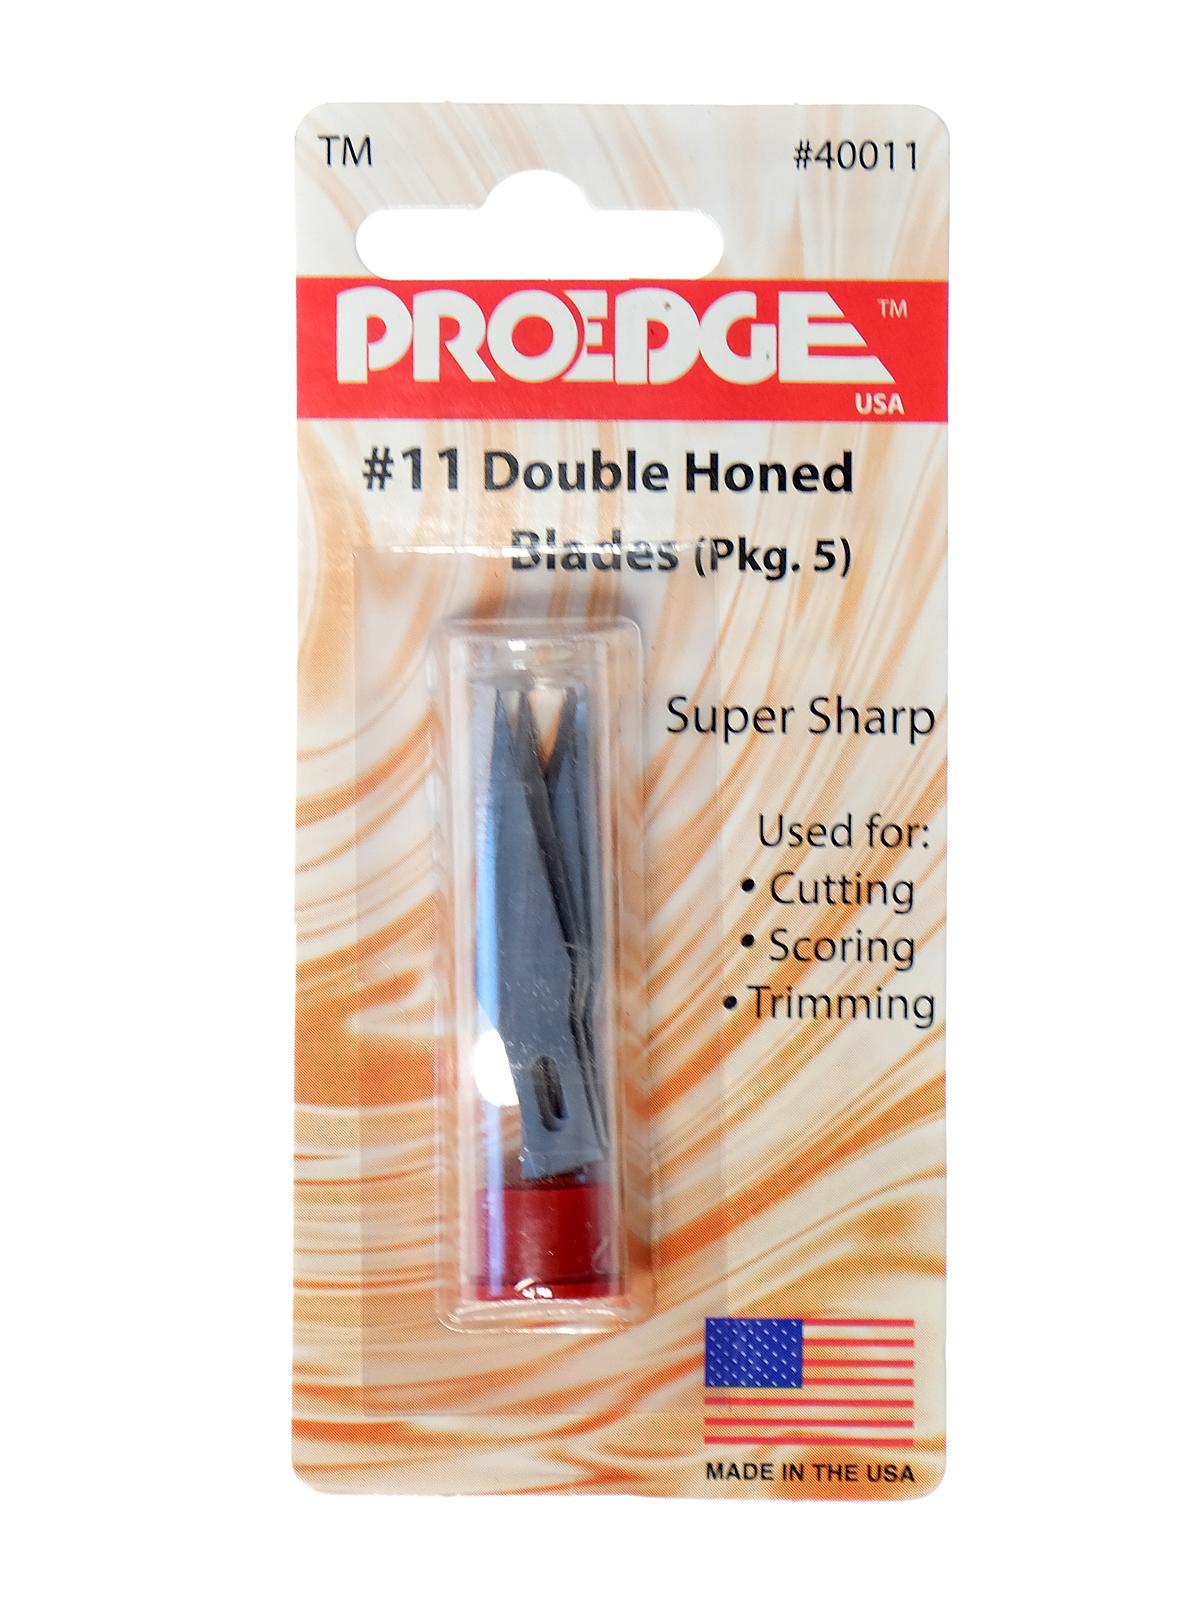 Pro #1 Precision Duty Knife No. 11 Replacement Blades Pack Of 5